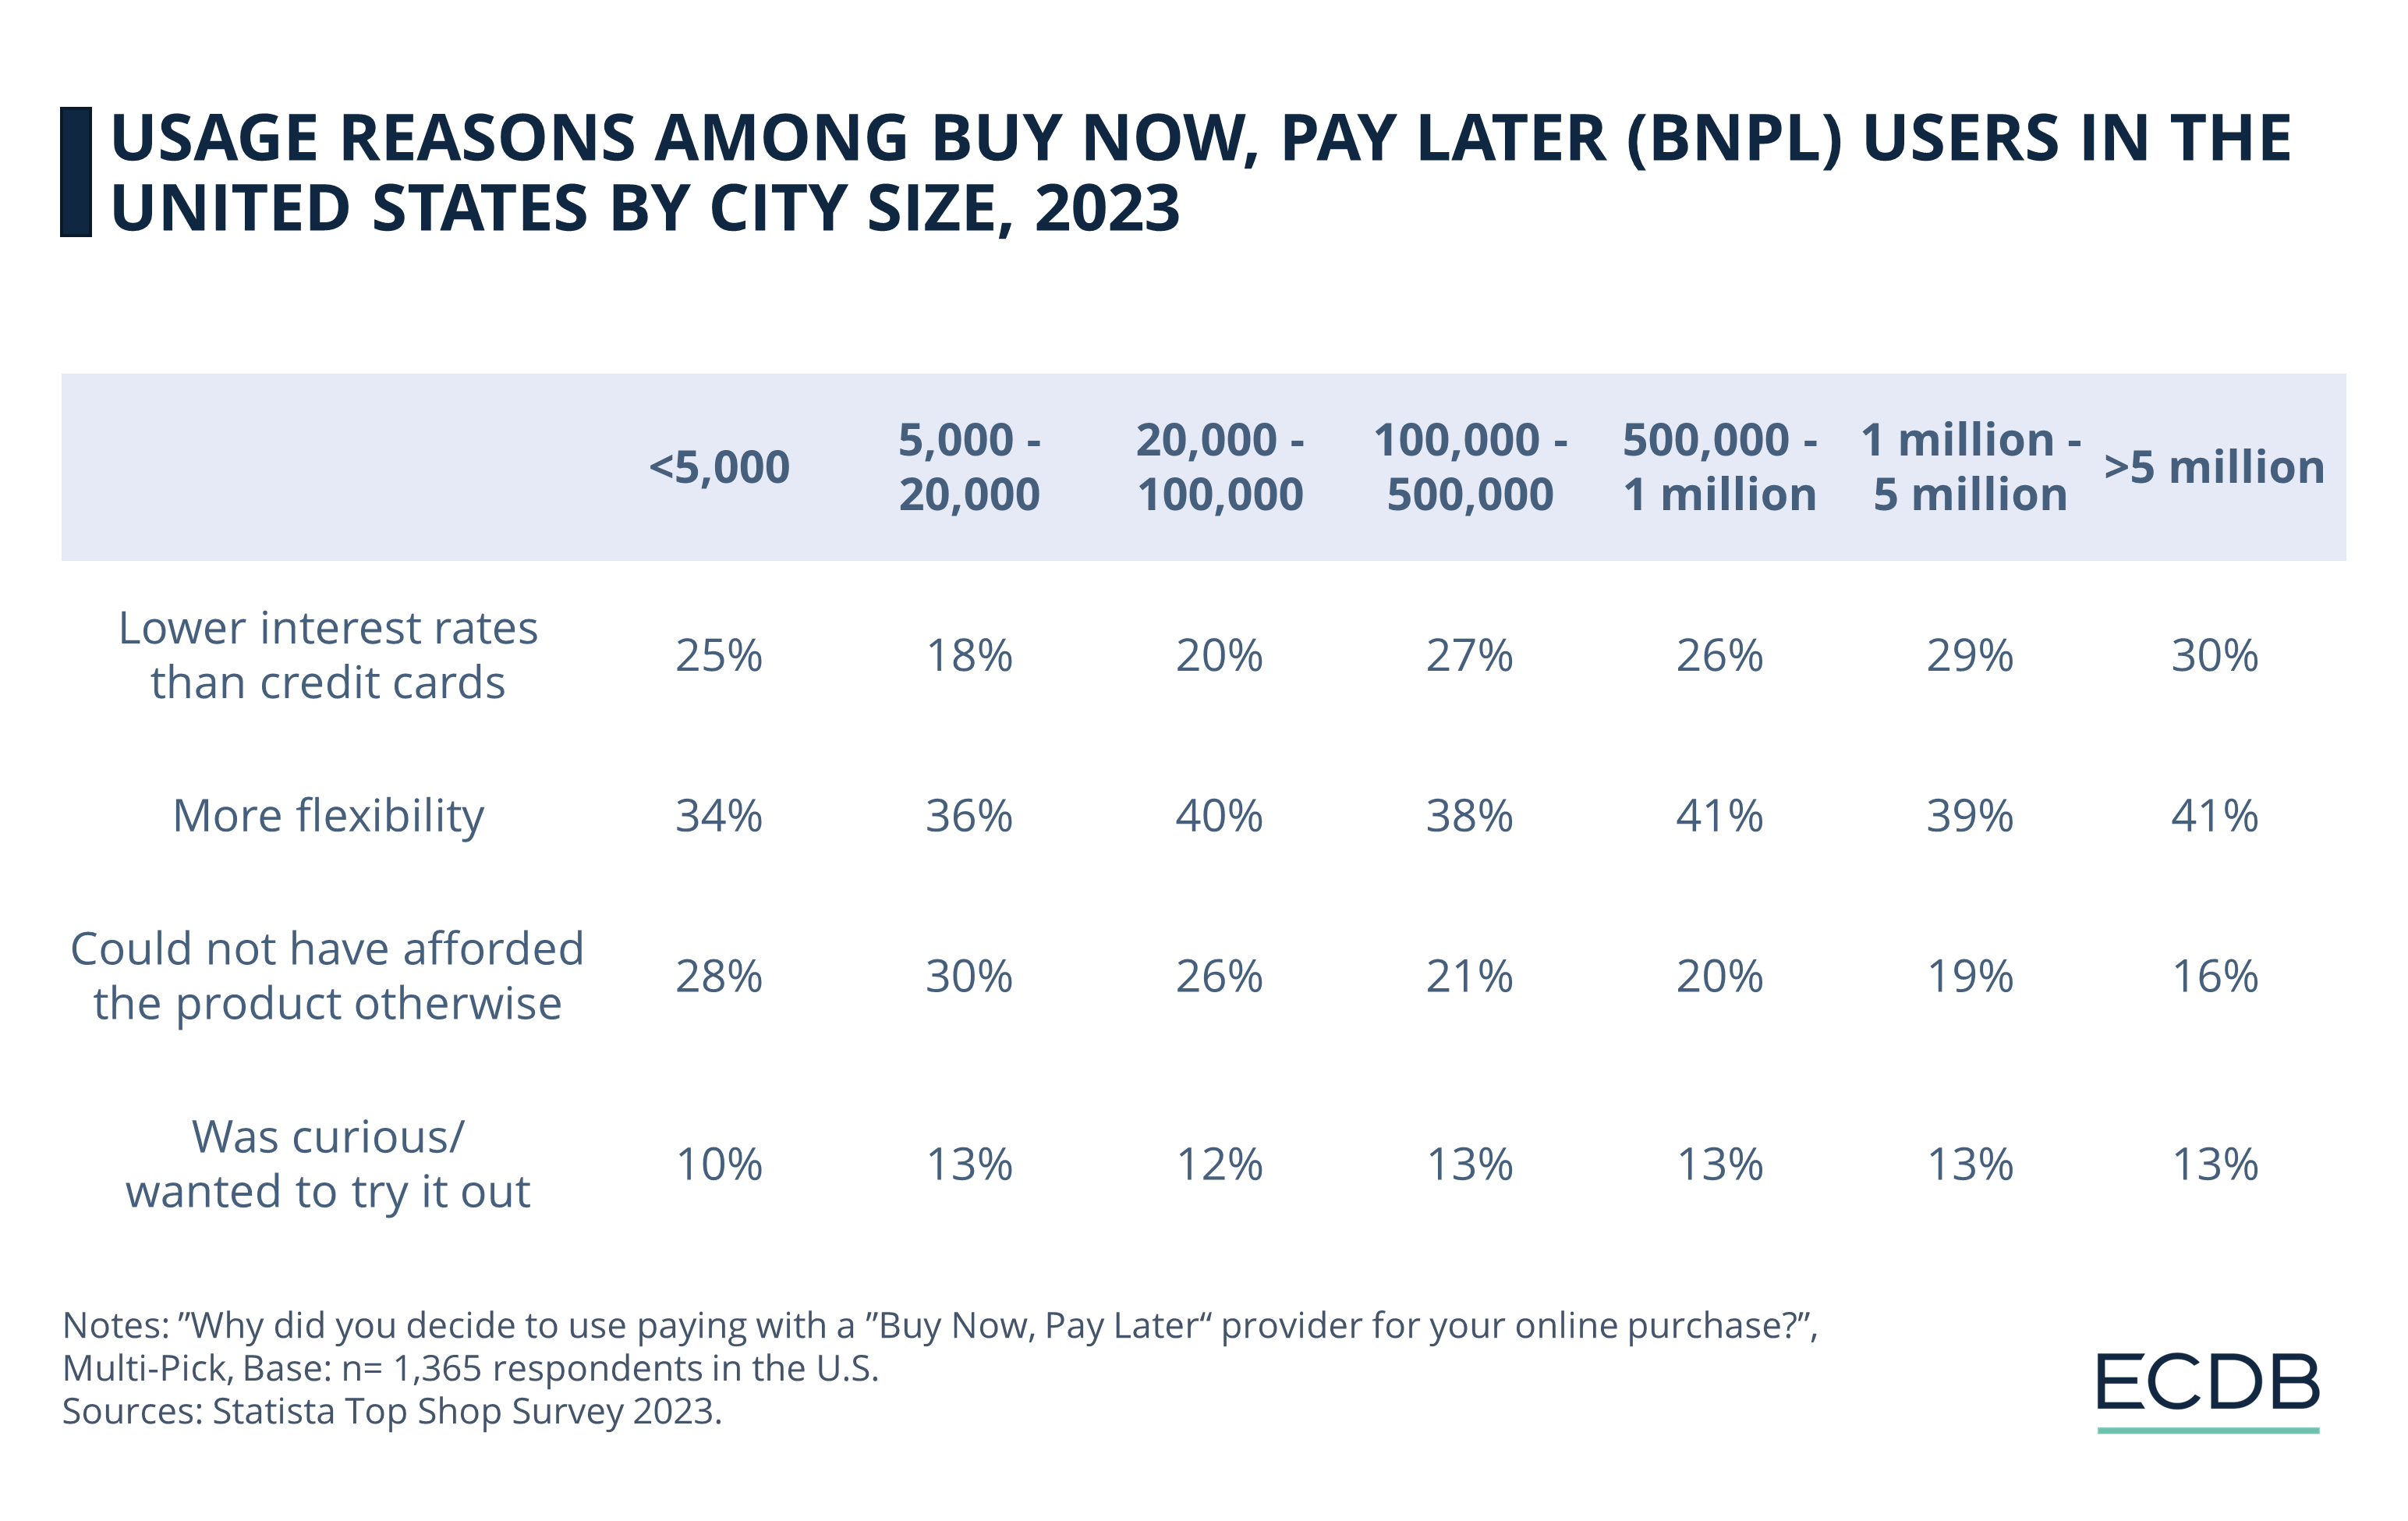 Usage Reasons Among Buy Now, Pay Later (BNPL) Users in the United States by City Size, 2023